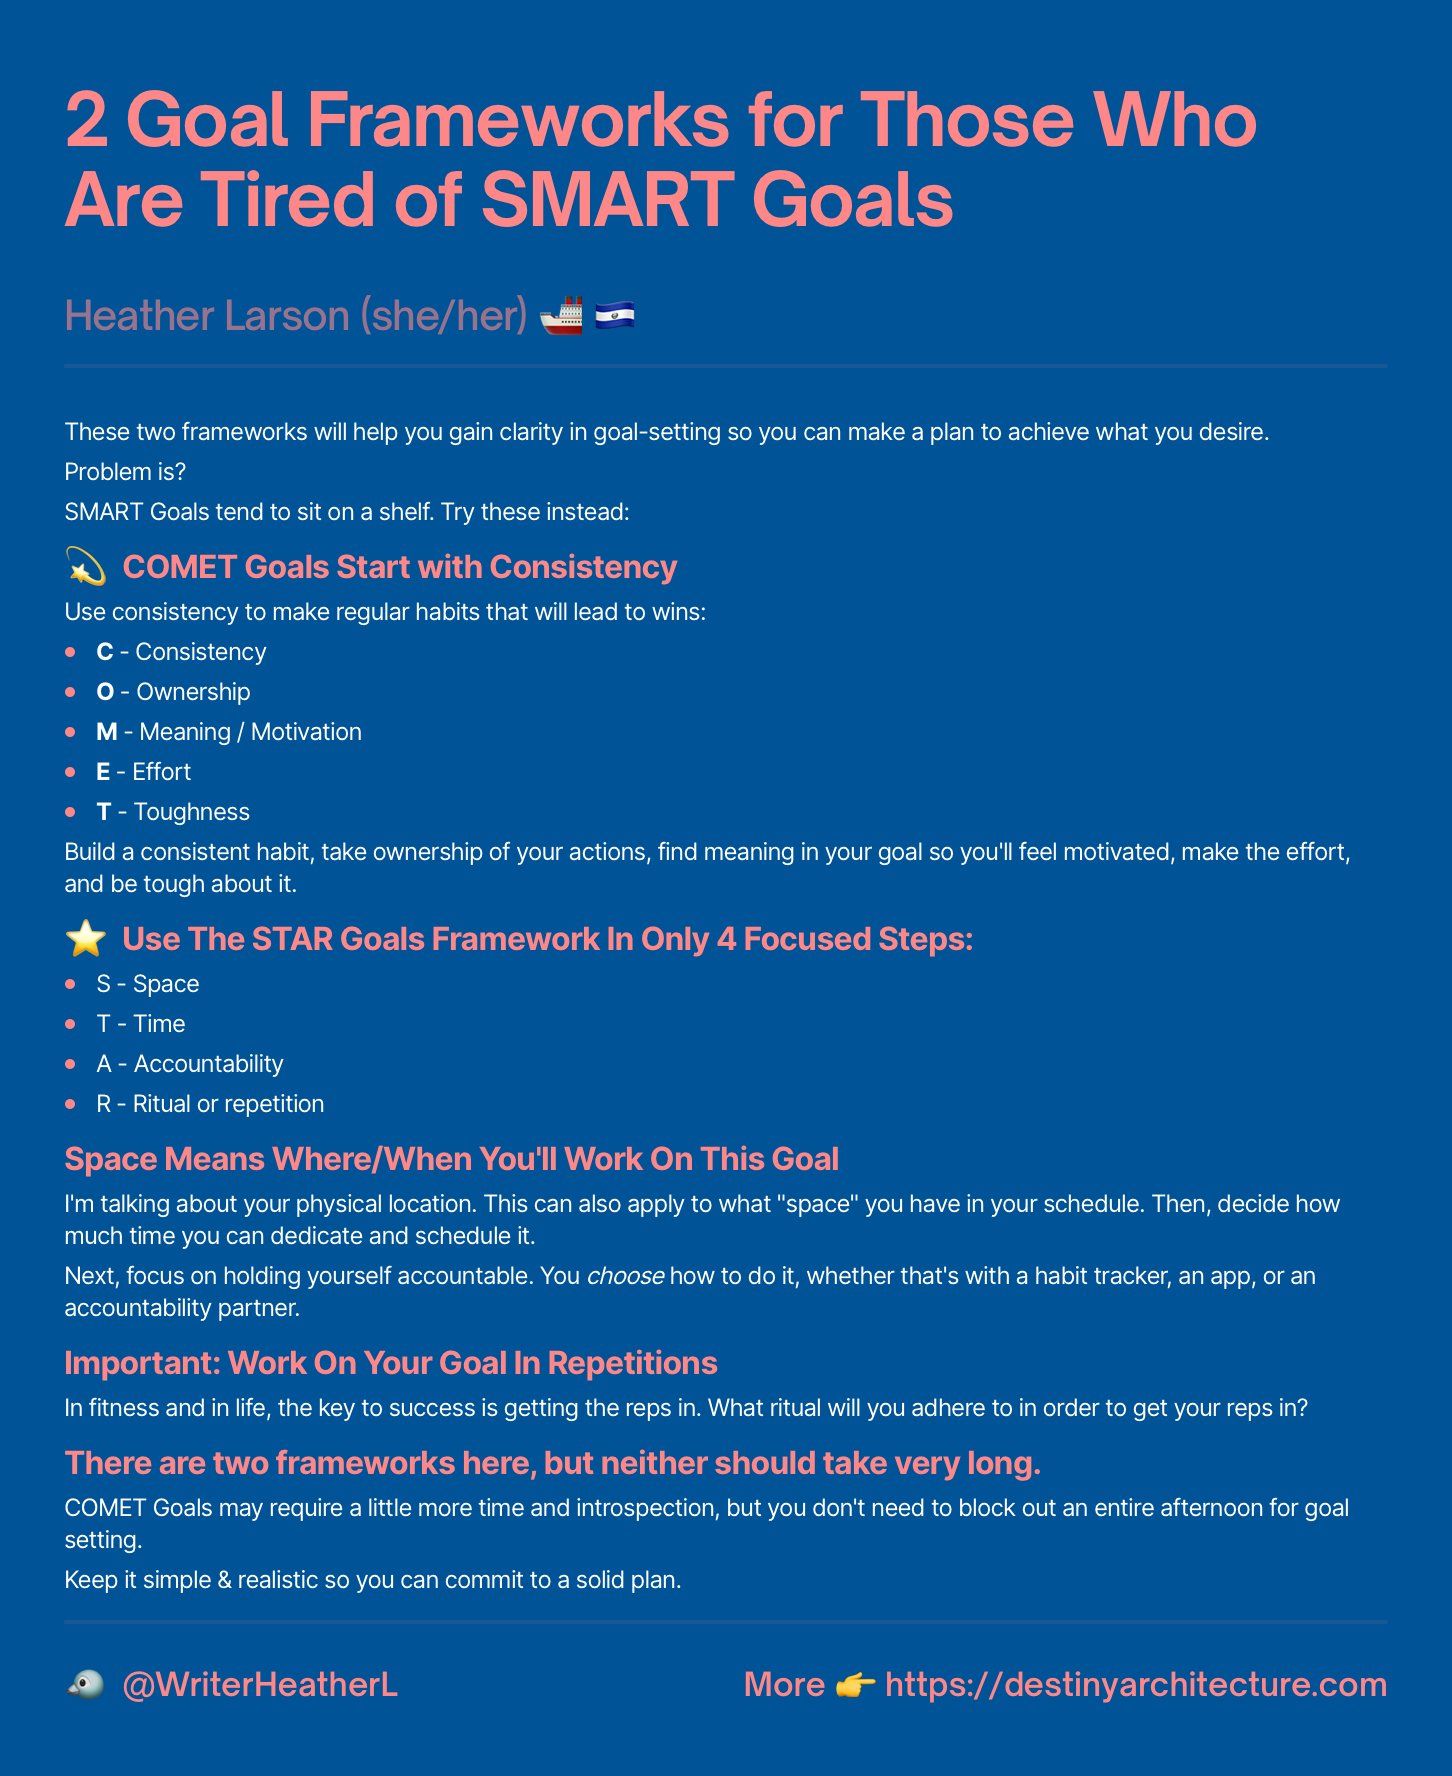 2 Goal Frameworks for Those Who Are Tired of SMART Goals